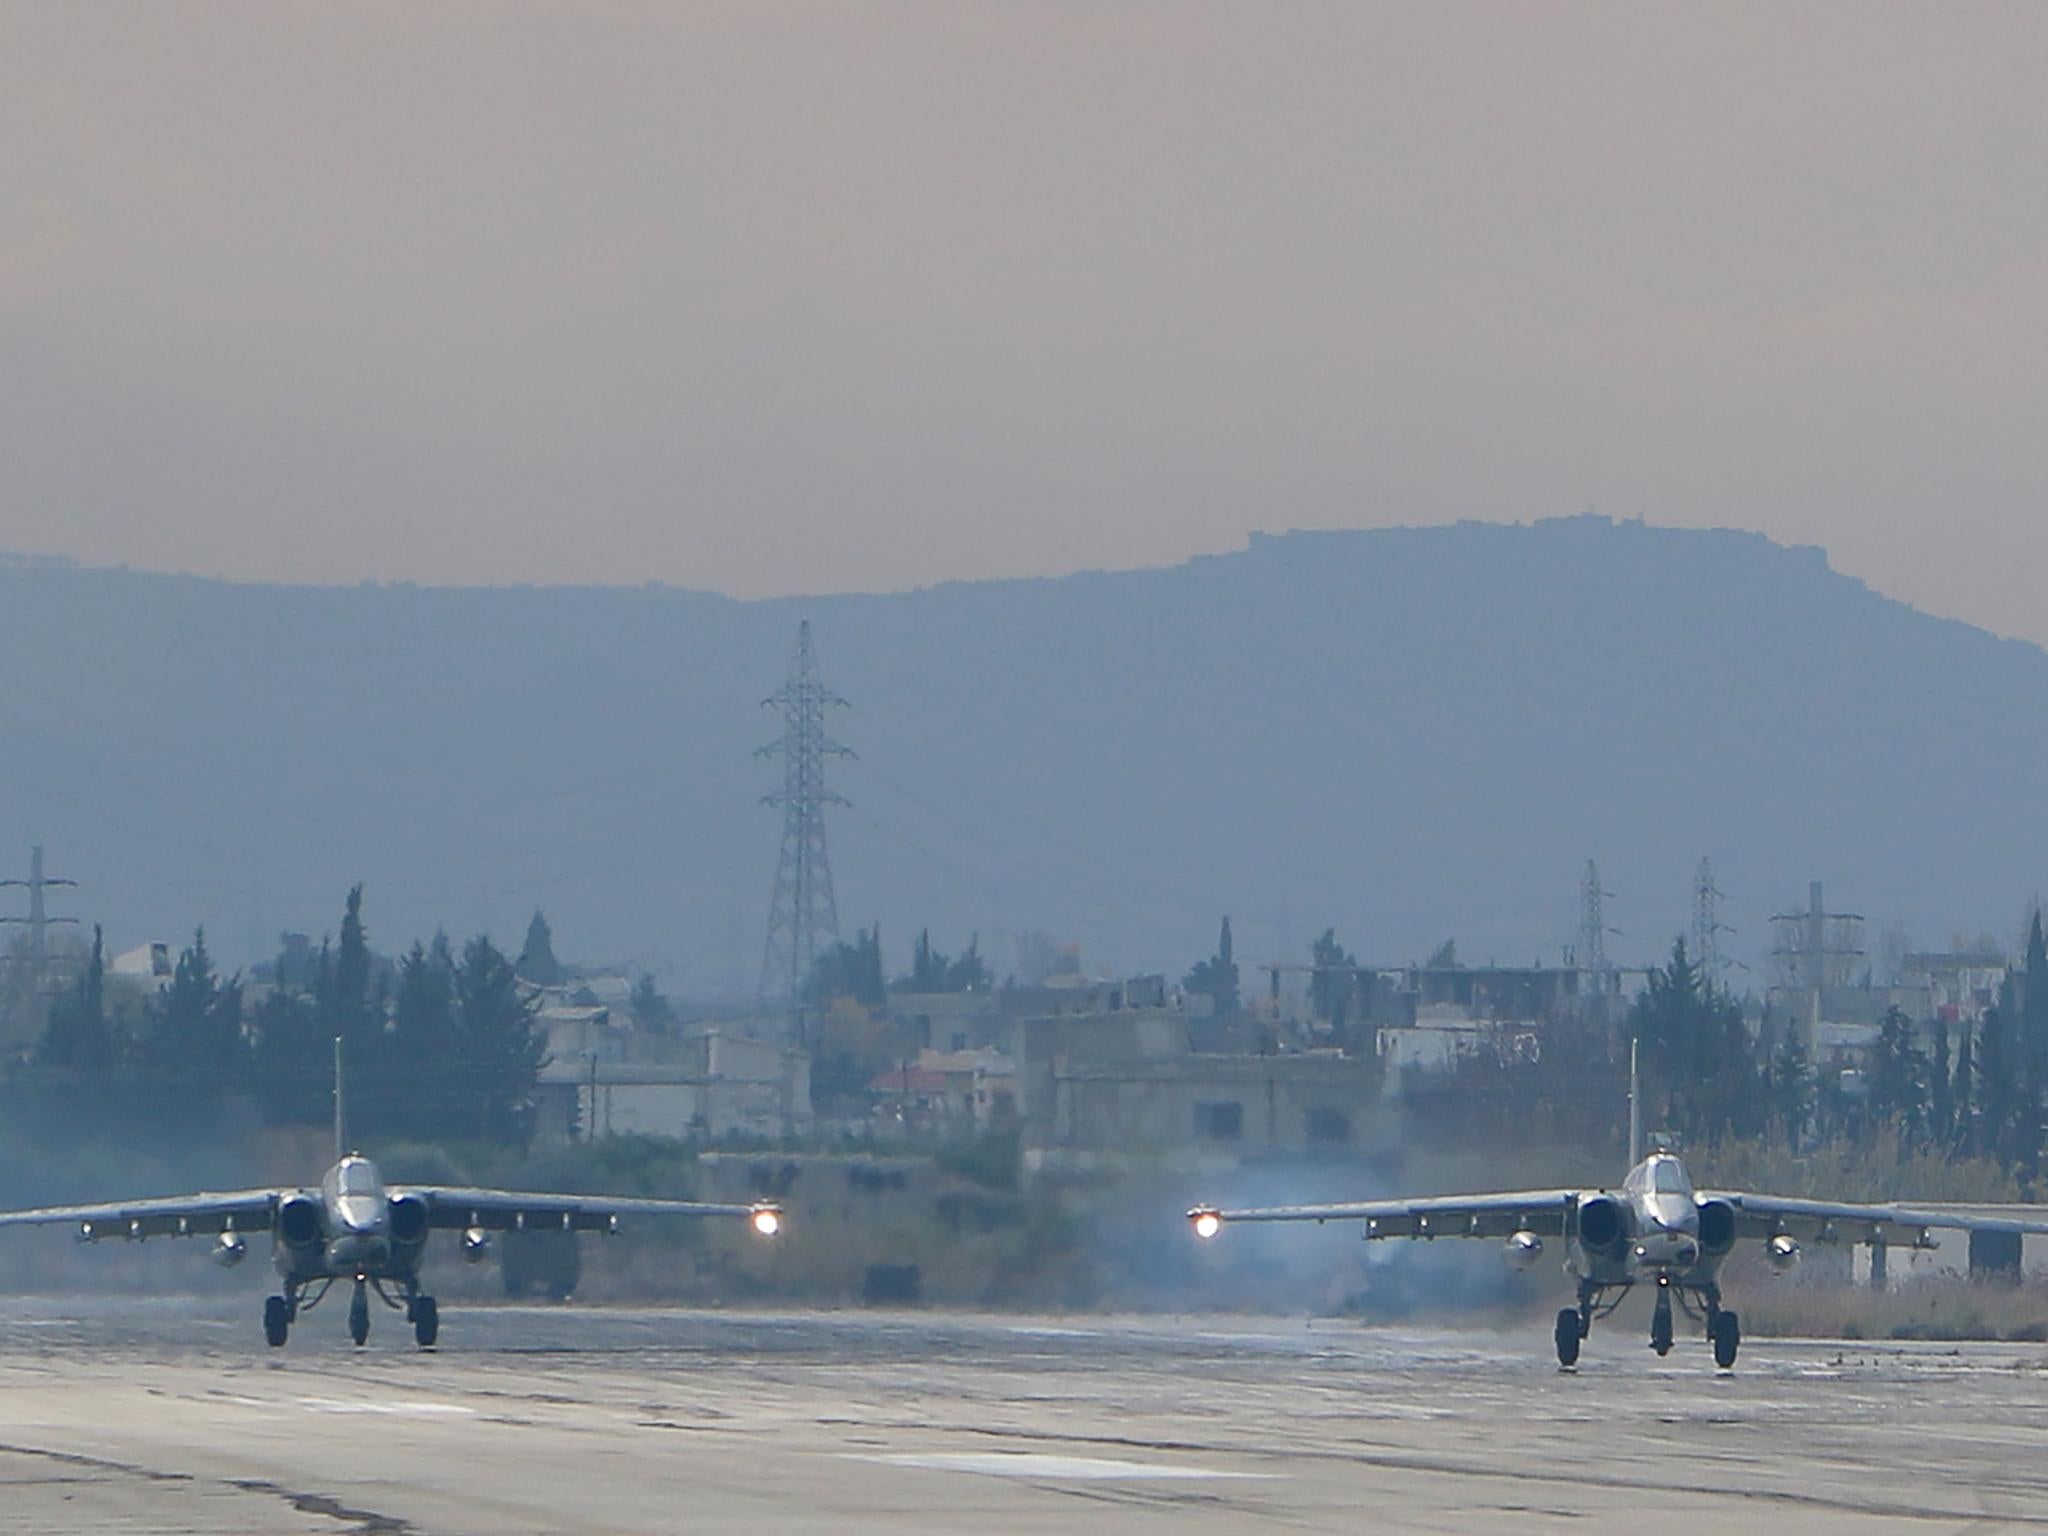 Two Russian Sukhoi Su-25 bombers at the Russian Hmeimim military base in Latakia province, in the northwest of Syria